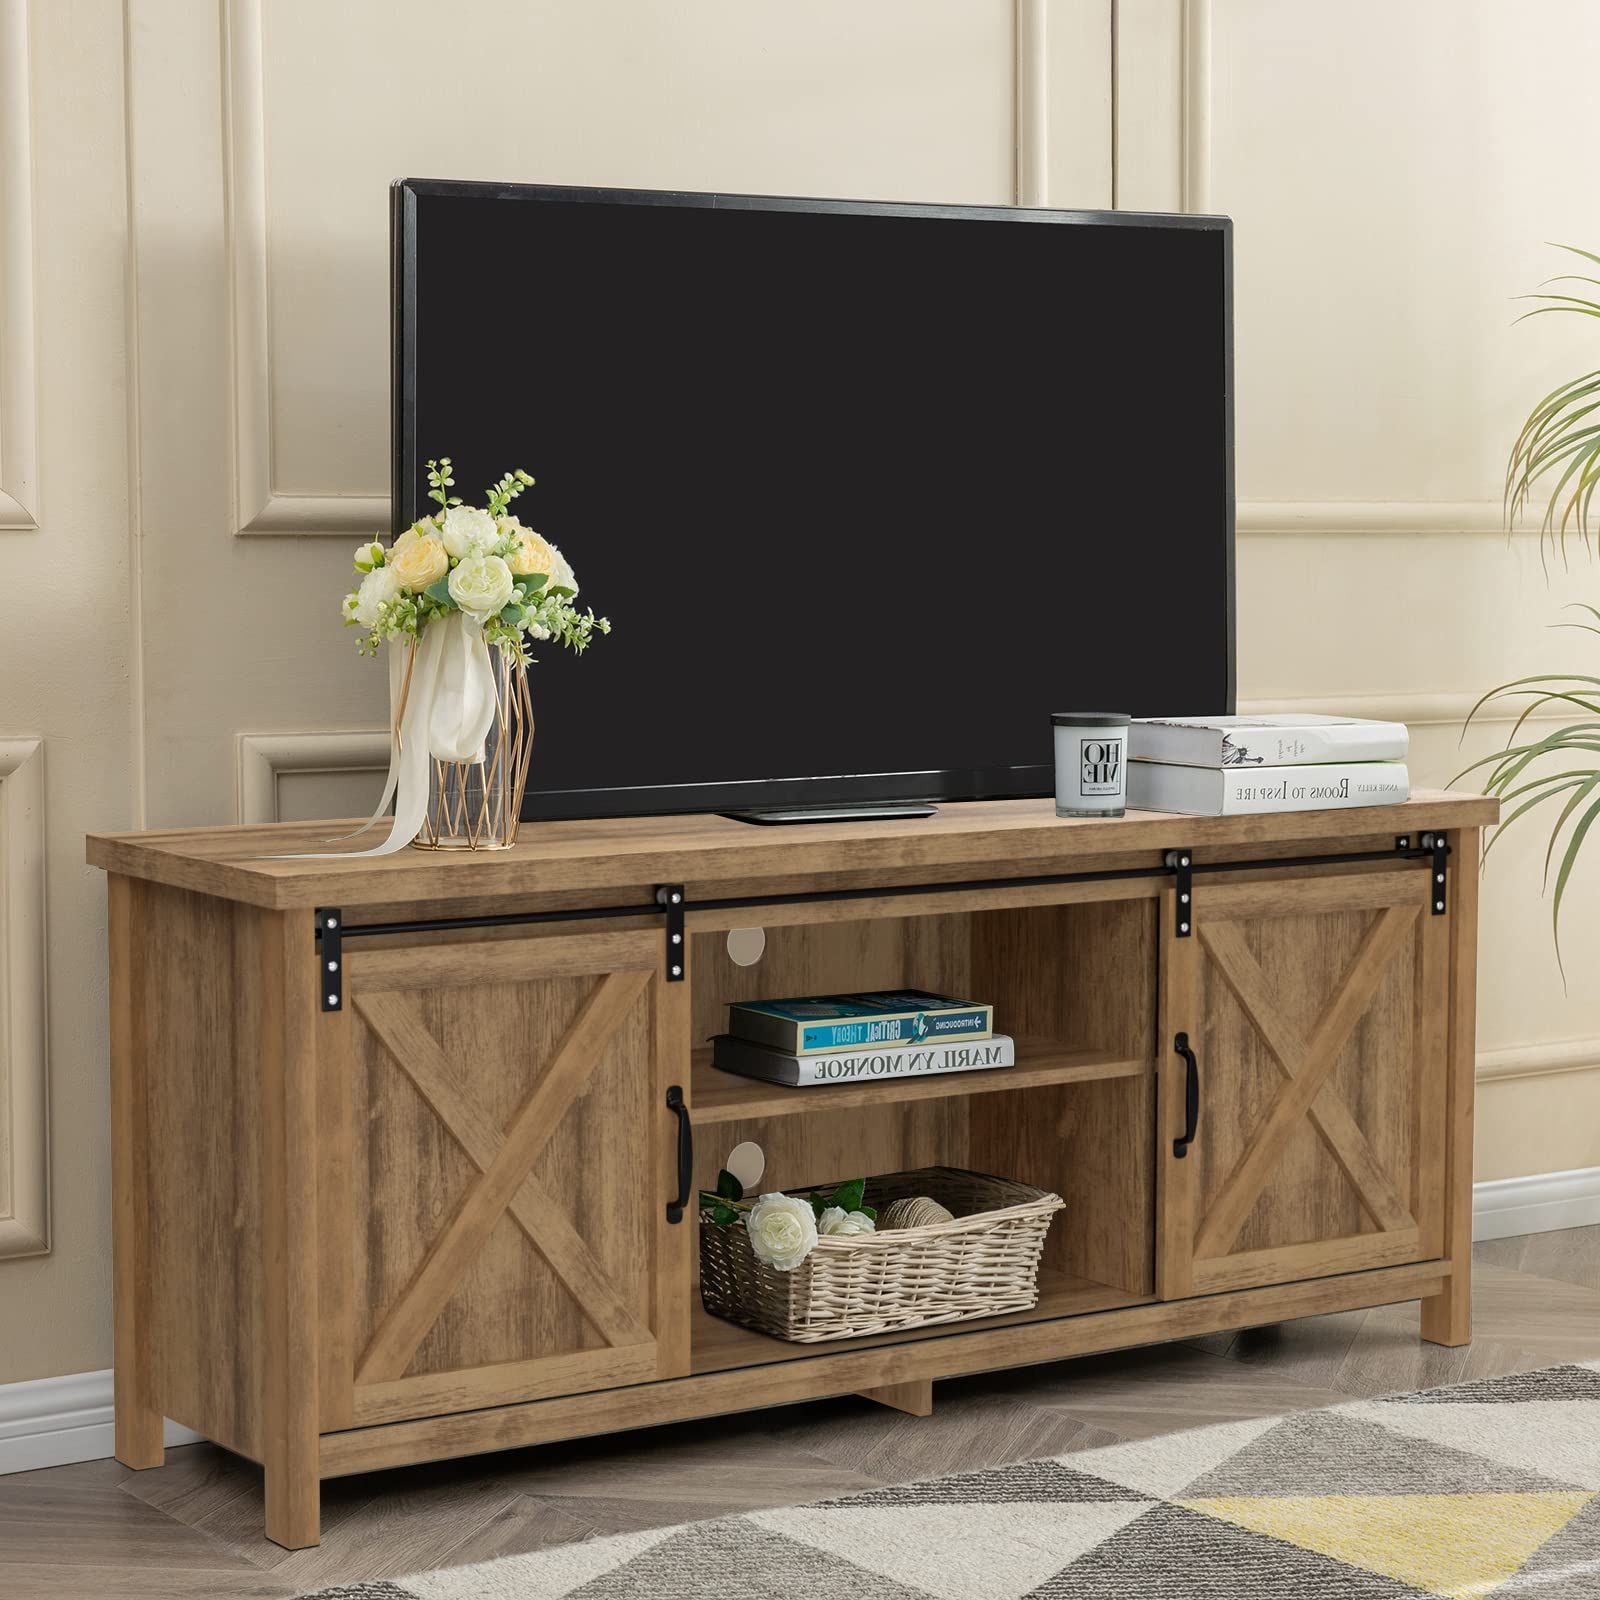 Farmhouse Style Tv Stands Intended For Current Amazon: Gazhome Modern Farmhouse Tv Stand With Sliding Barn Doors,  Media Entertainment Center Console Table For Tvs Up To 65”,2 Tier Large  Storage Cabinets,rustic Tv Stand For Living Room, Bedroom,wood : Electronics (View 9 of 10)